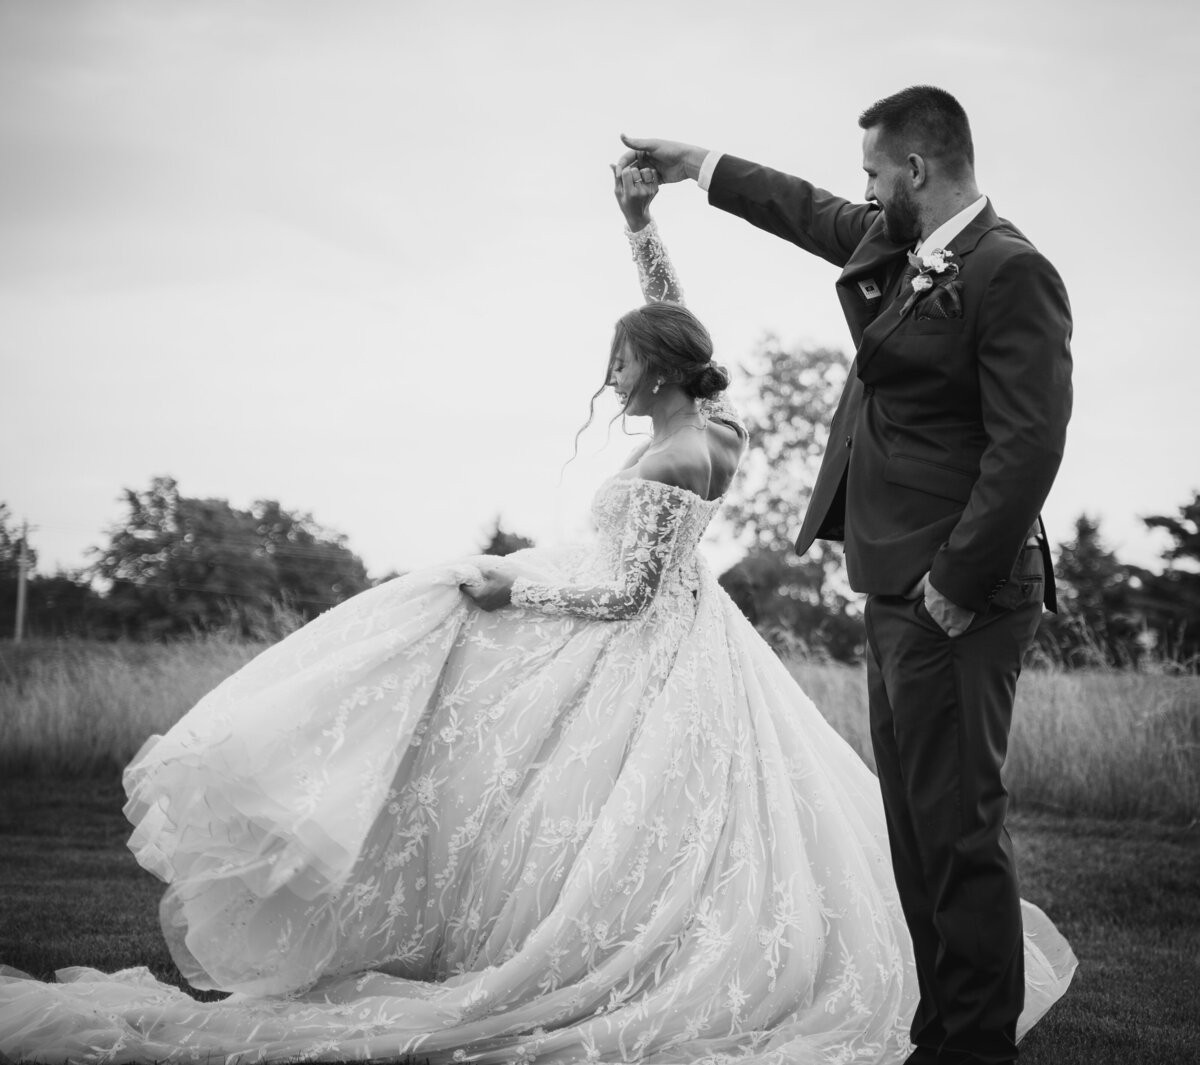 The groom, Ryan Bee, twirls his bride, Mahalie in her magnificent lace ballgown at their wedding at The Old Blue Rooster Event Center LLC in Lithopolis, Ohio.